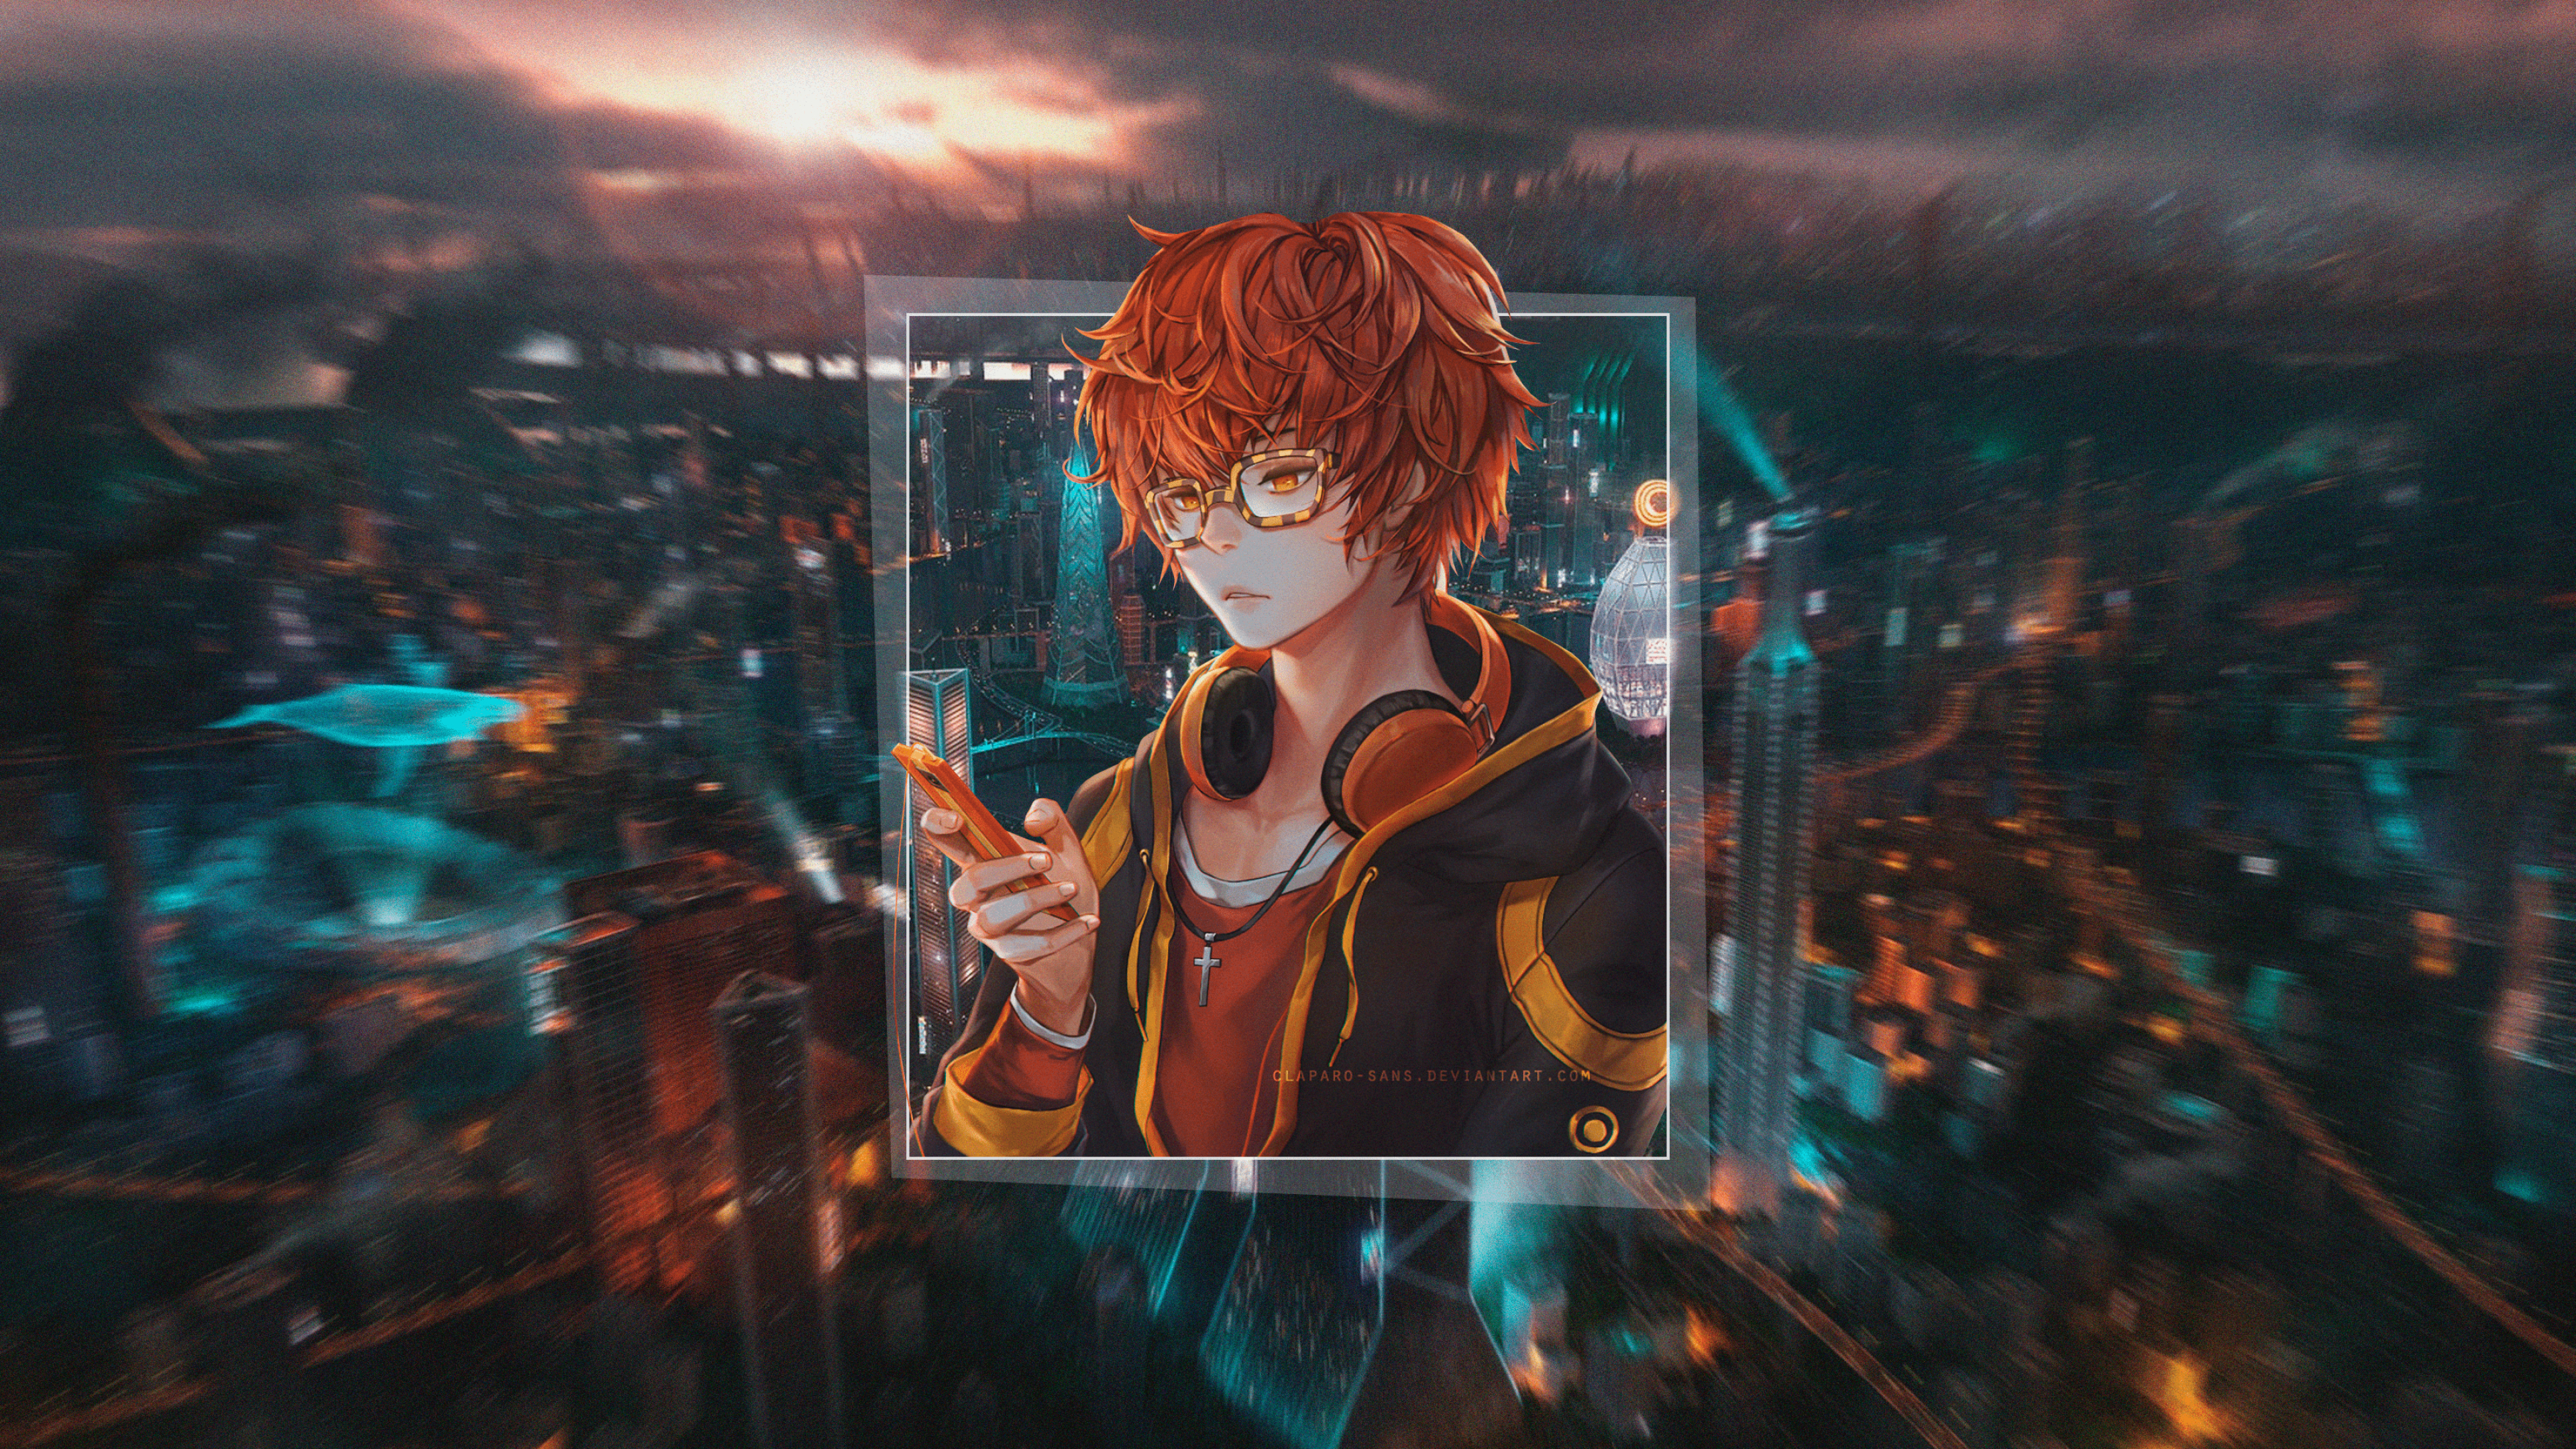 3840x2160 40+ Mystic Messenger HD Wallpapers and Backgrounds